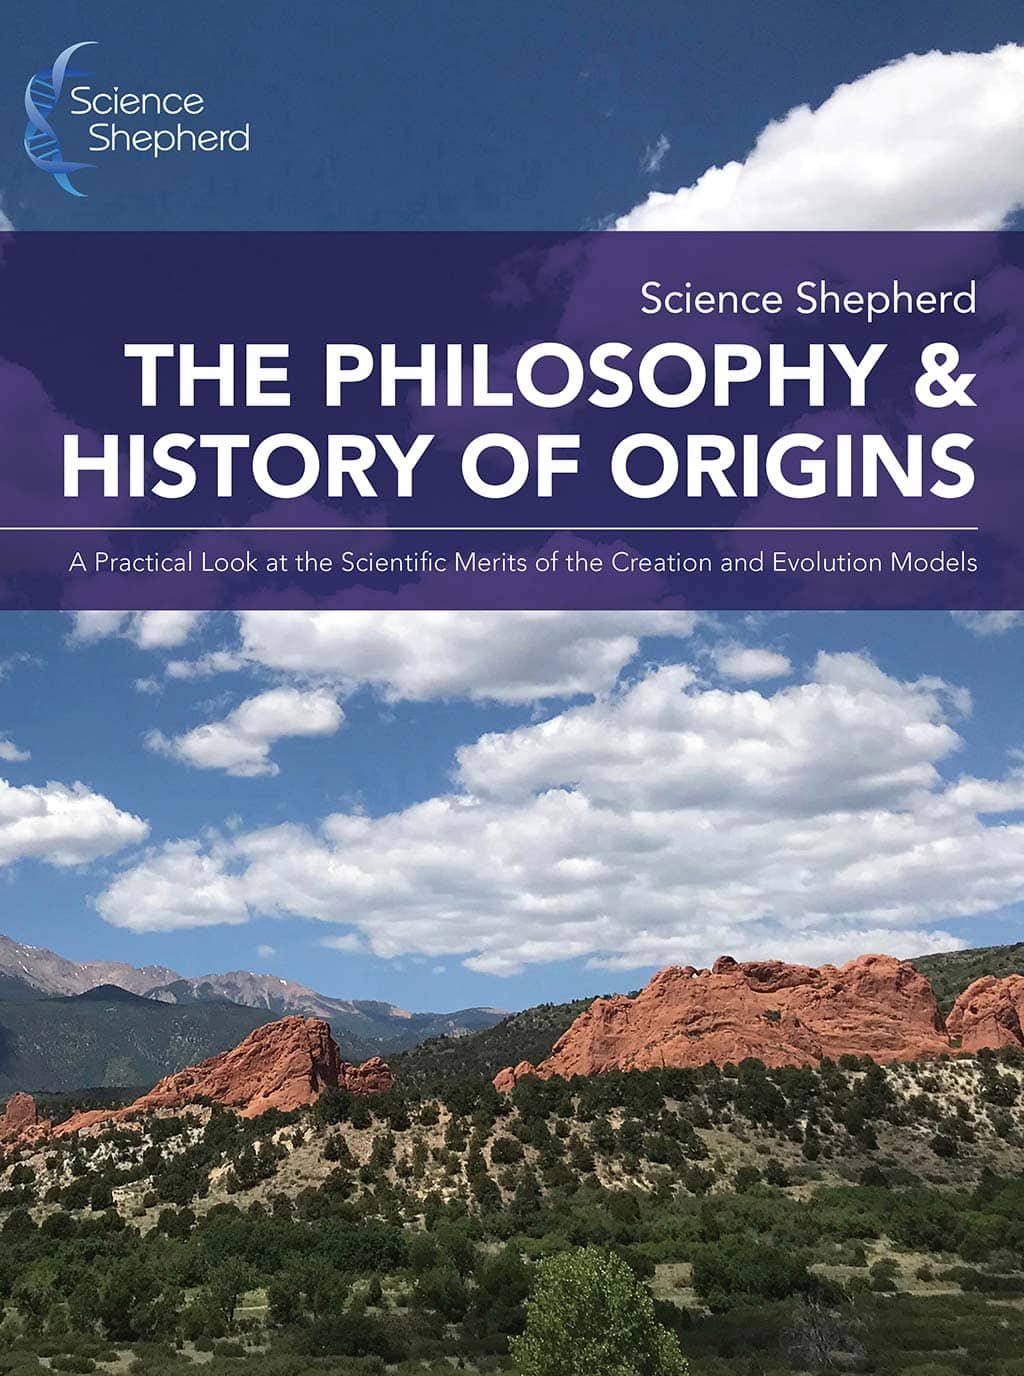 The Philosophy & History of Origins creation science and evolution book cover of a rocky landscape